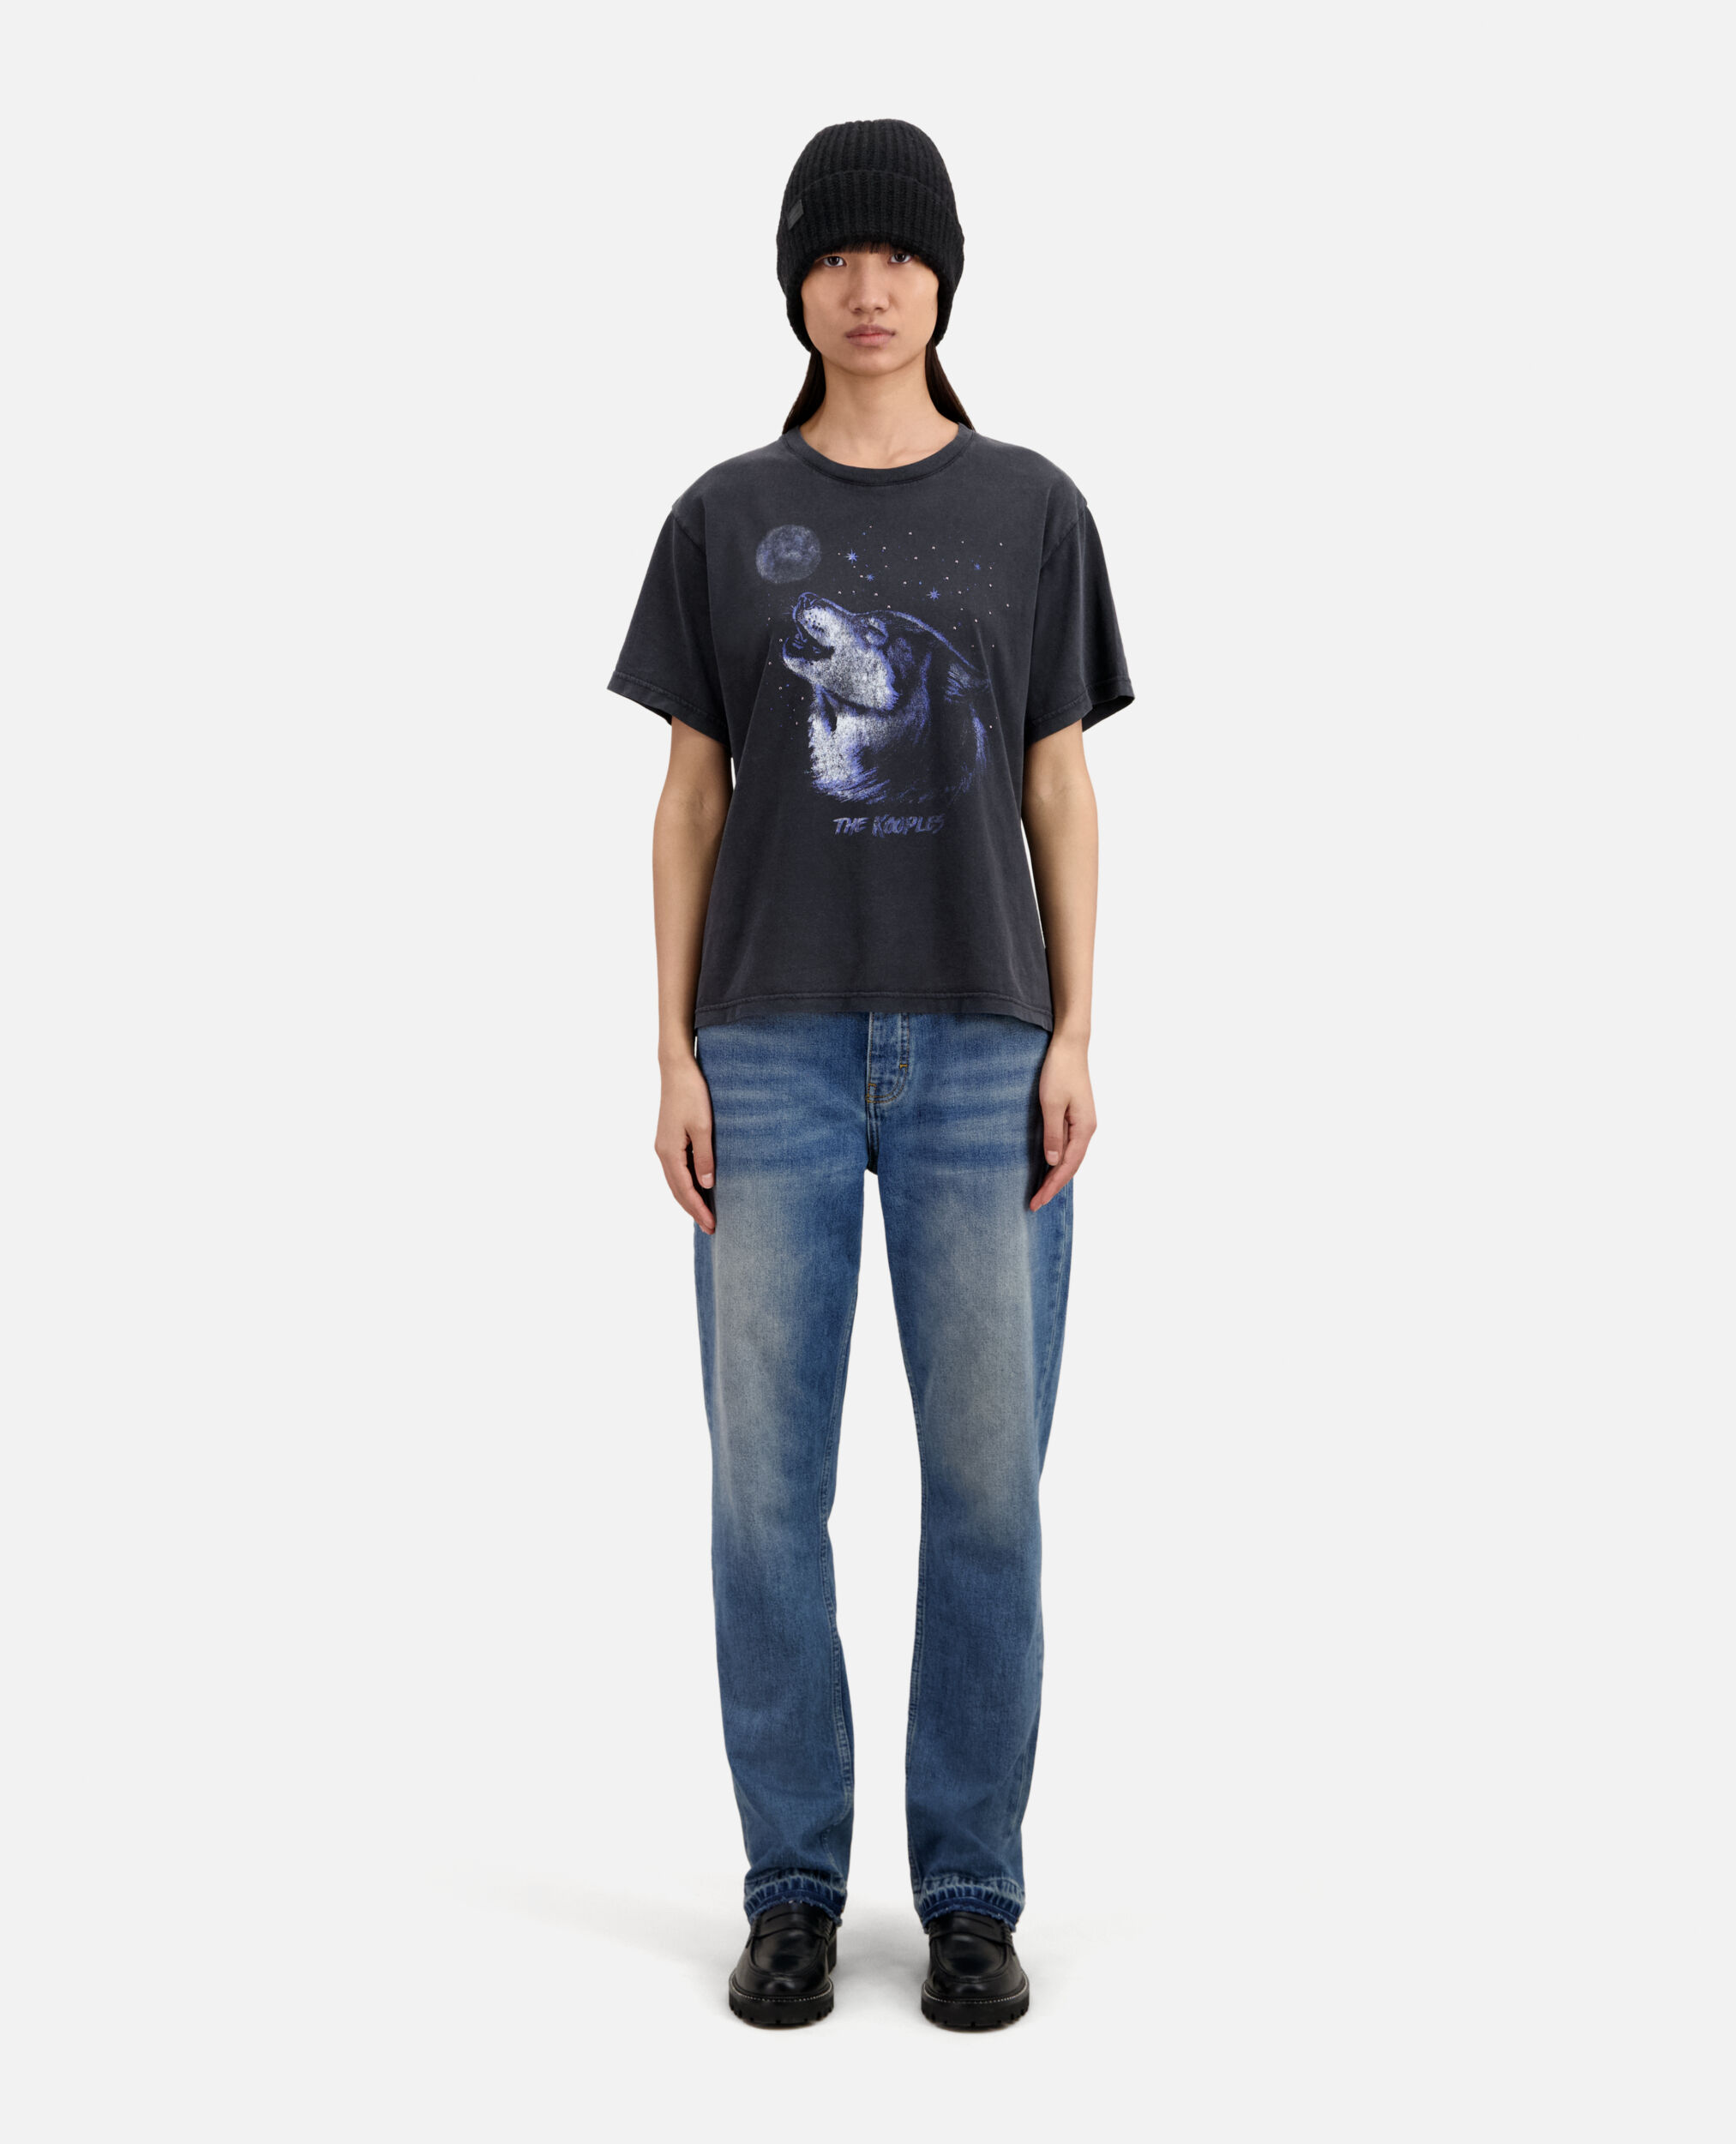 Women's black t-shirt with wolf serigraphy, BLACK WASHED, hi-res image number null